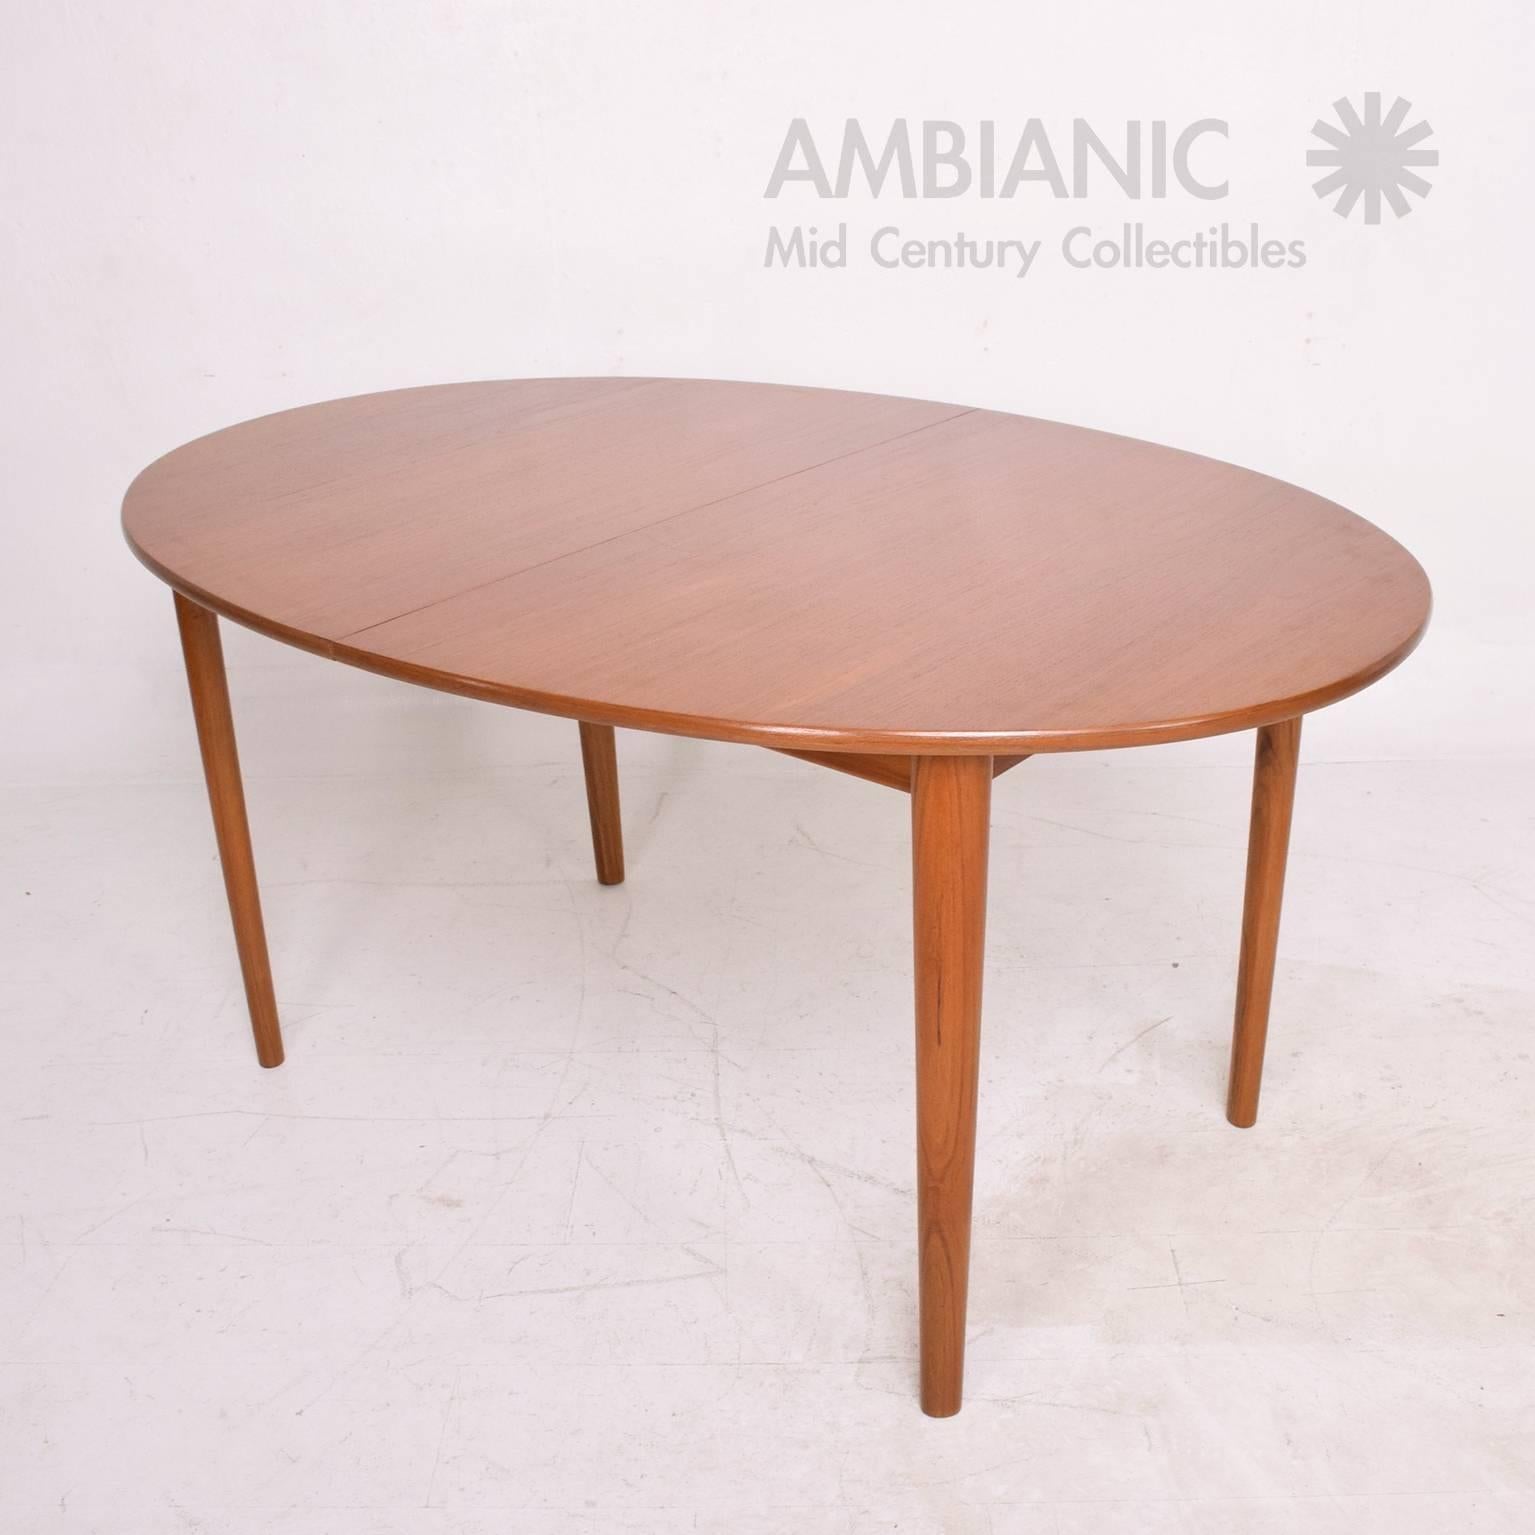 Danish Modern Teak Dining Table Oval Shape with Extensions 1